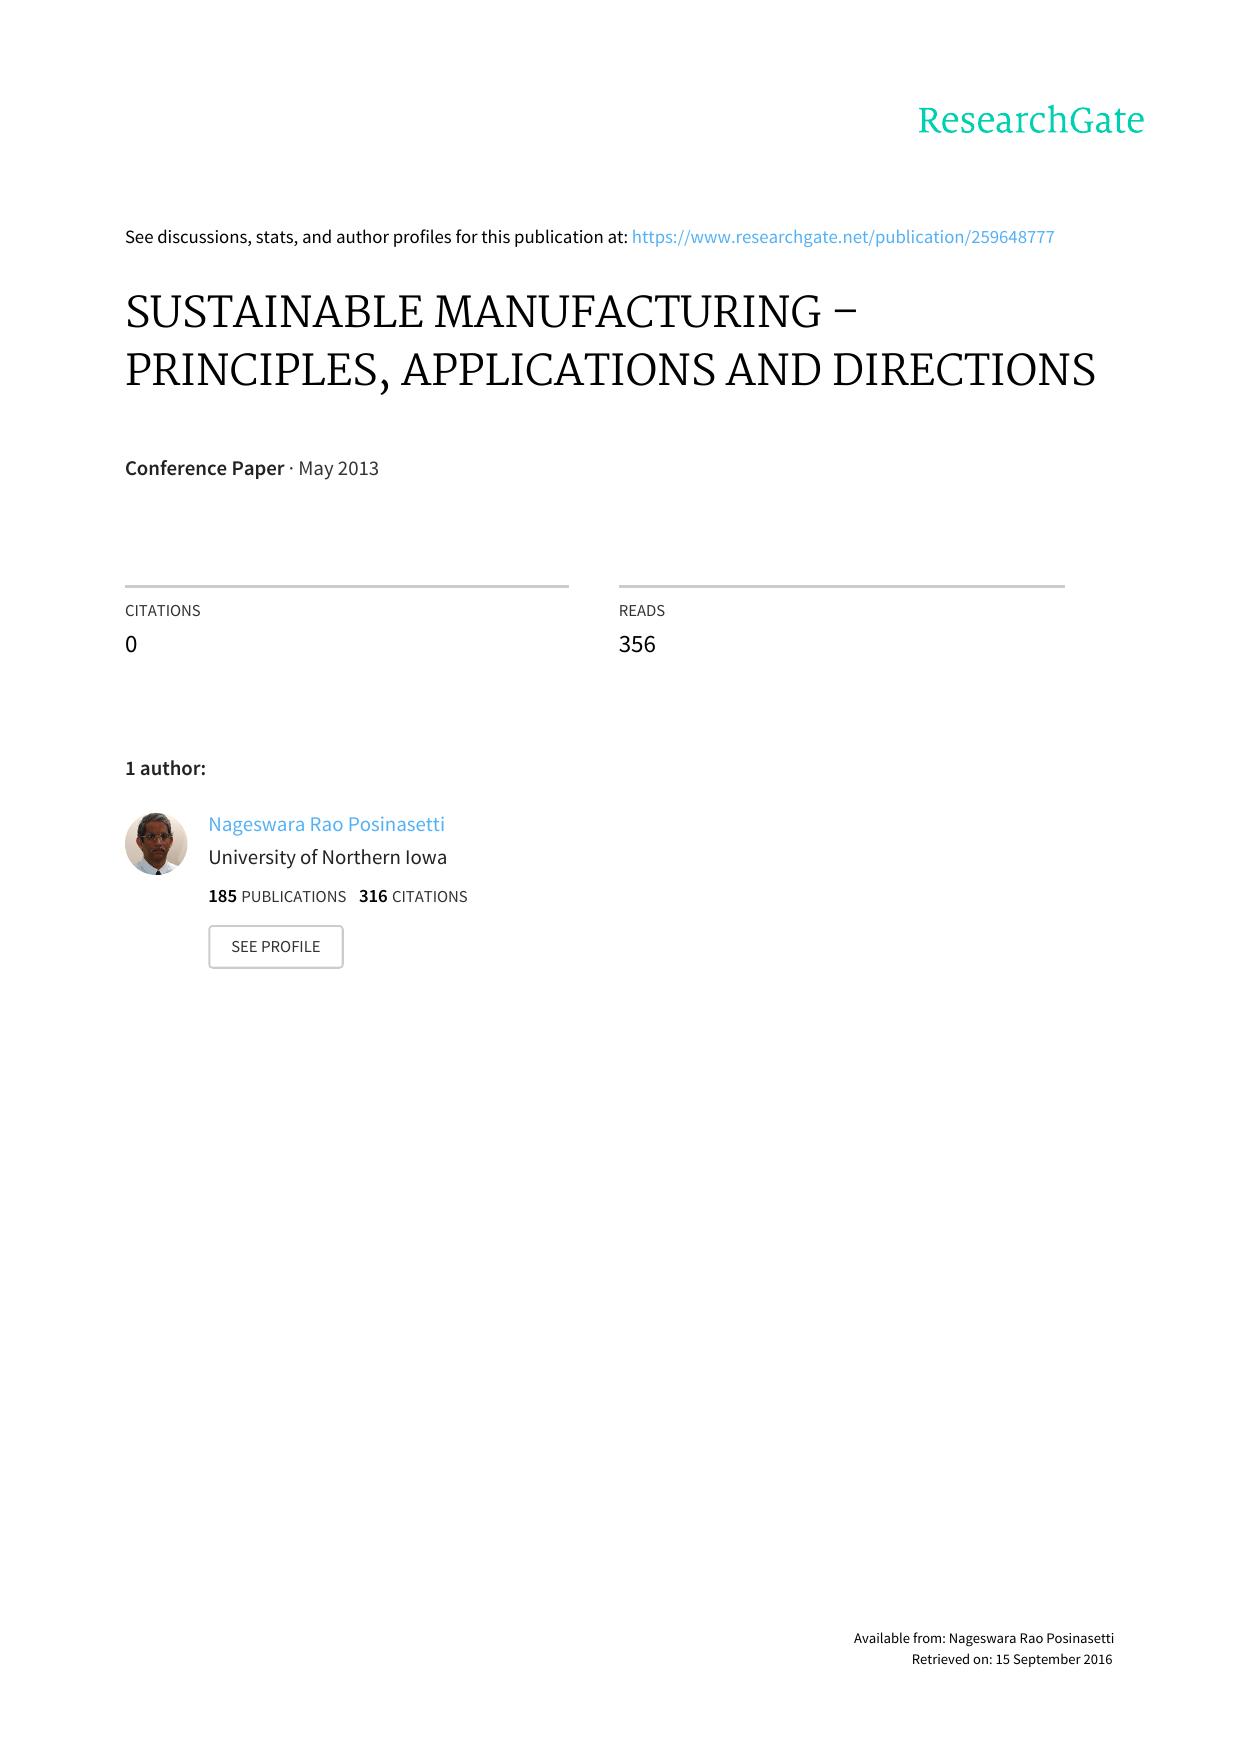 SUSTAINABLE MANUFACTURING  Conference paper Taylor 2013